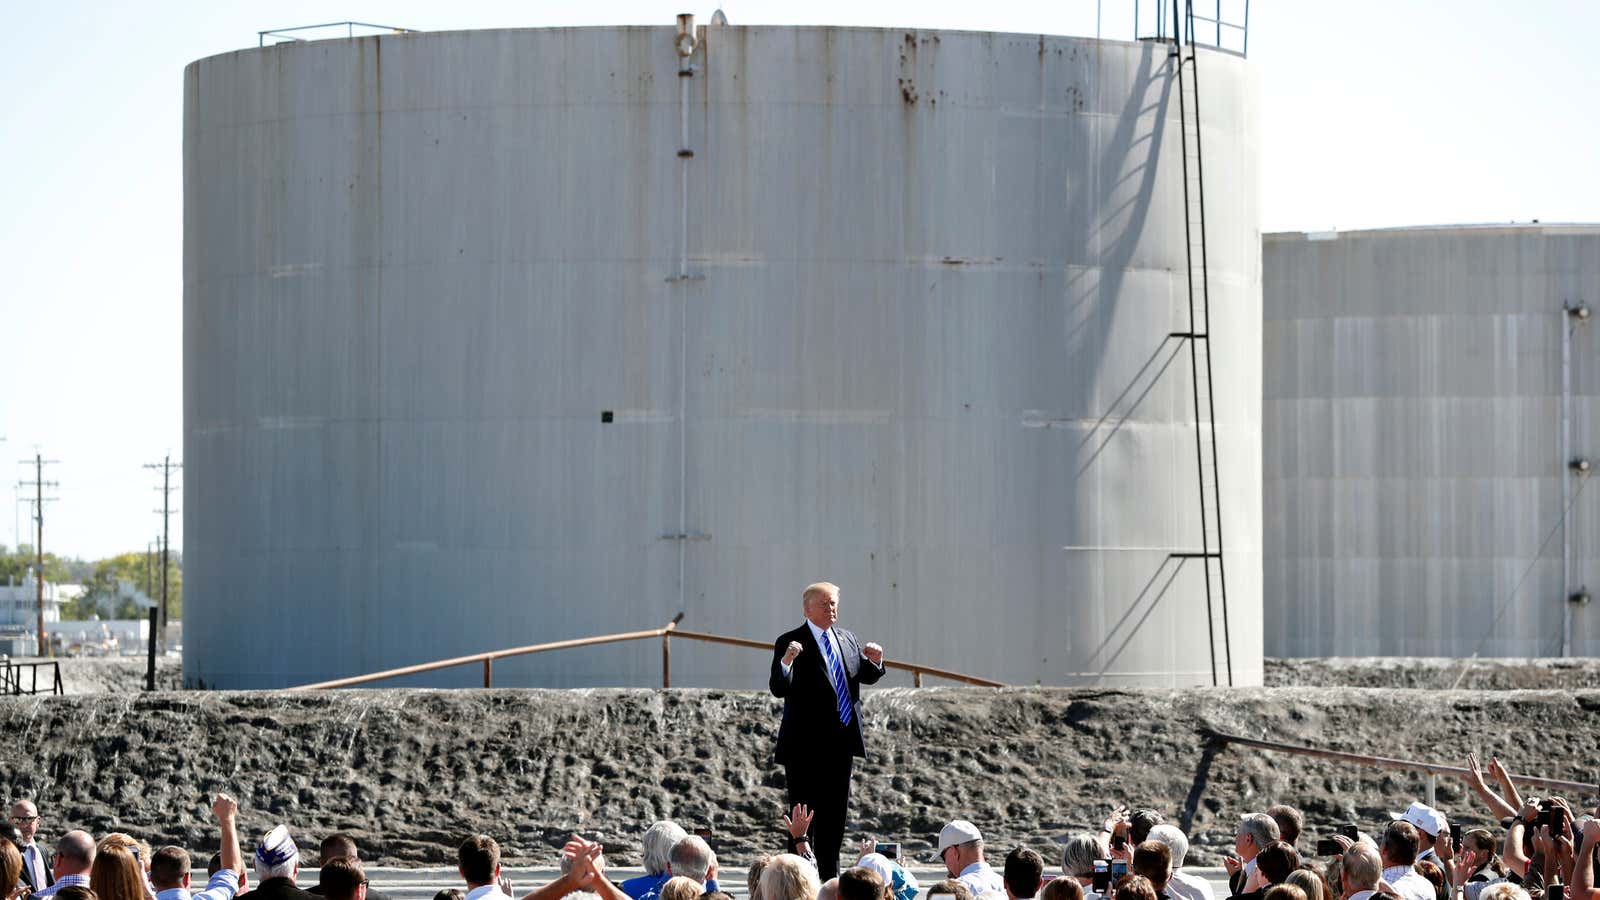 Donald Trump speaks at an oil refinery in September 2017.